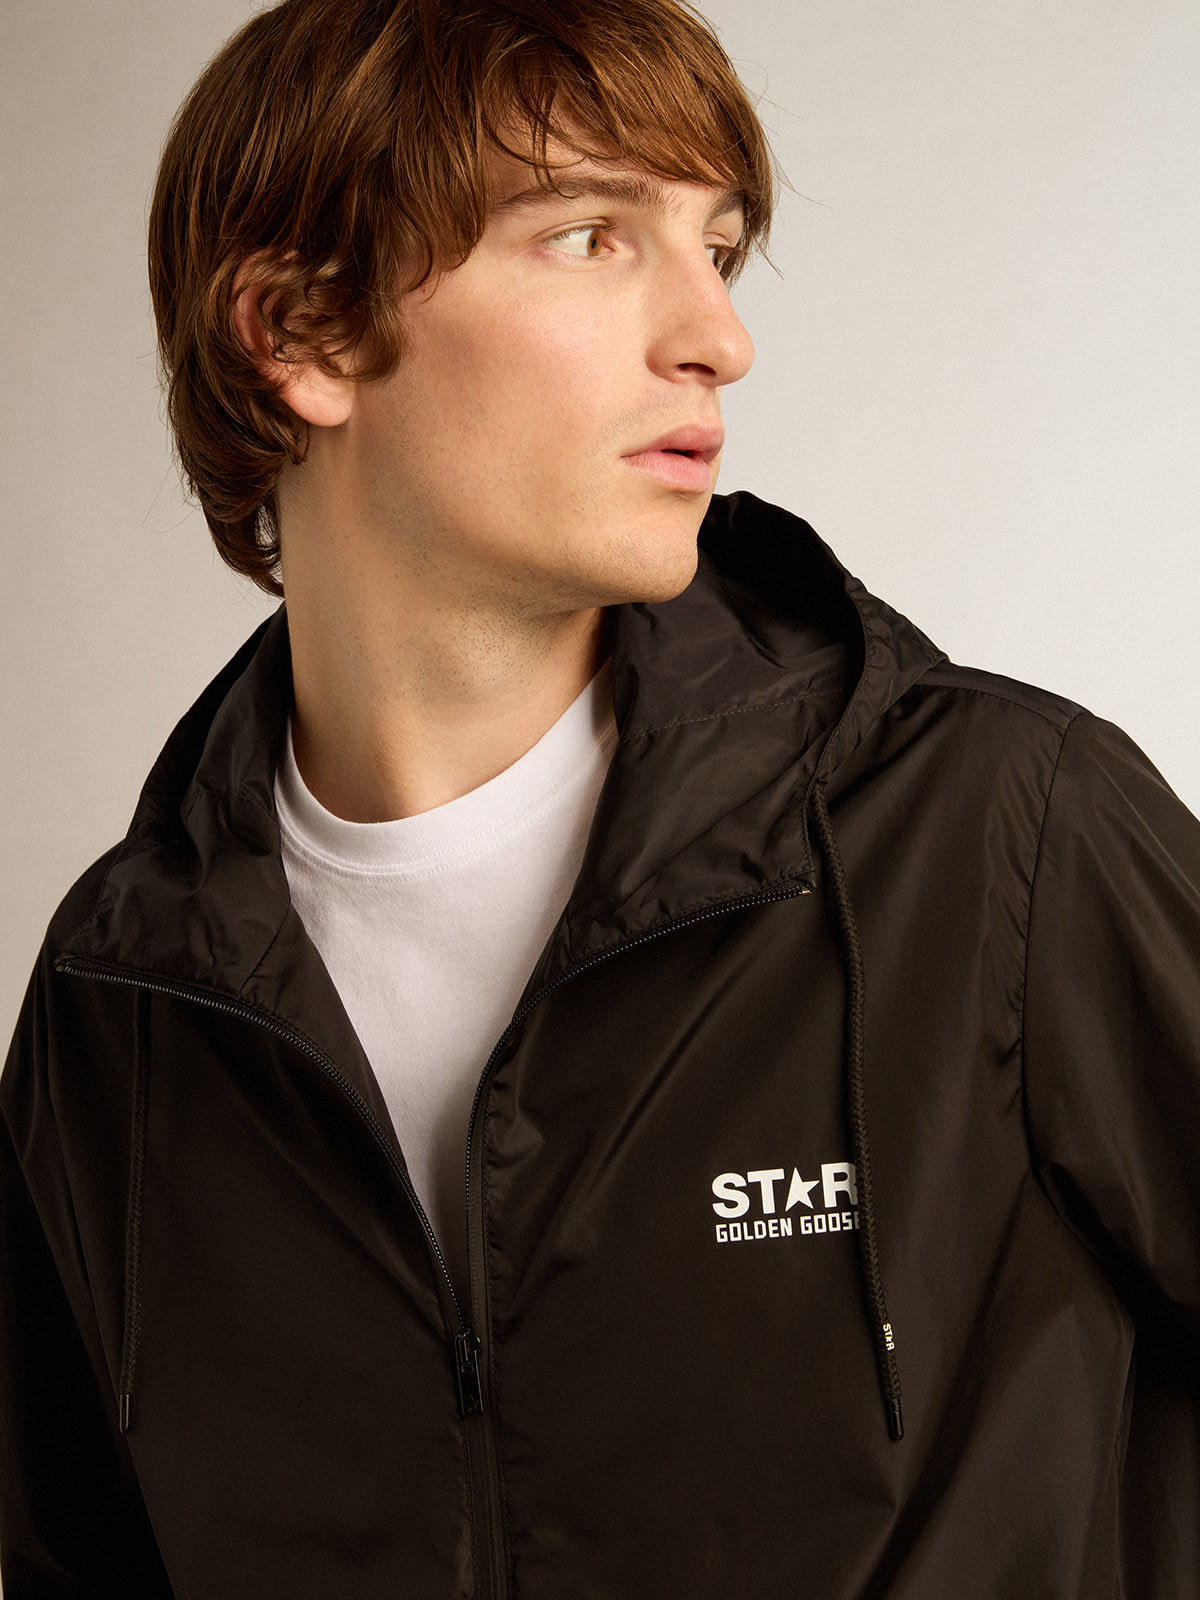 Golden Goose - Men’s windcheater with contrasting white logo and star in 